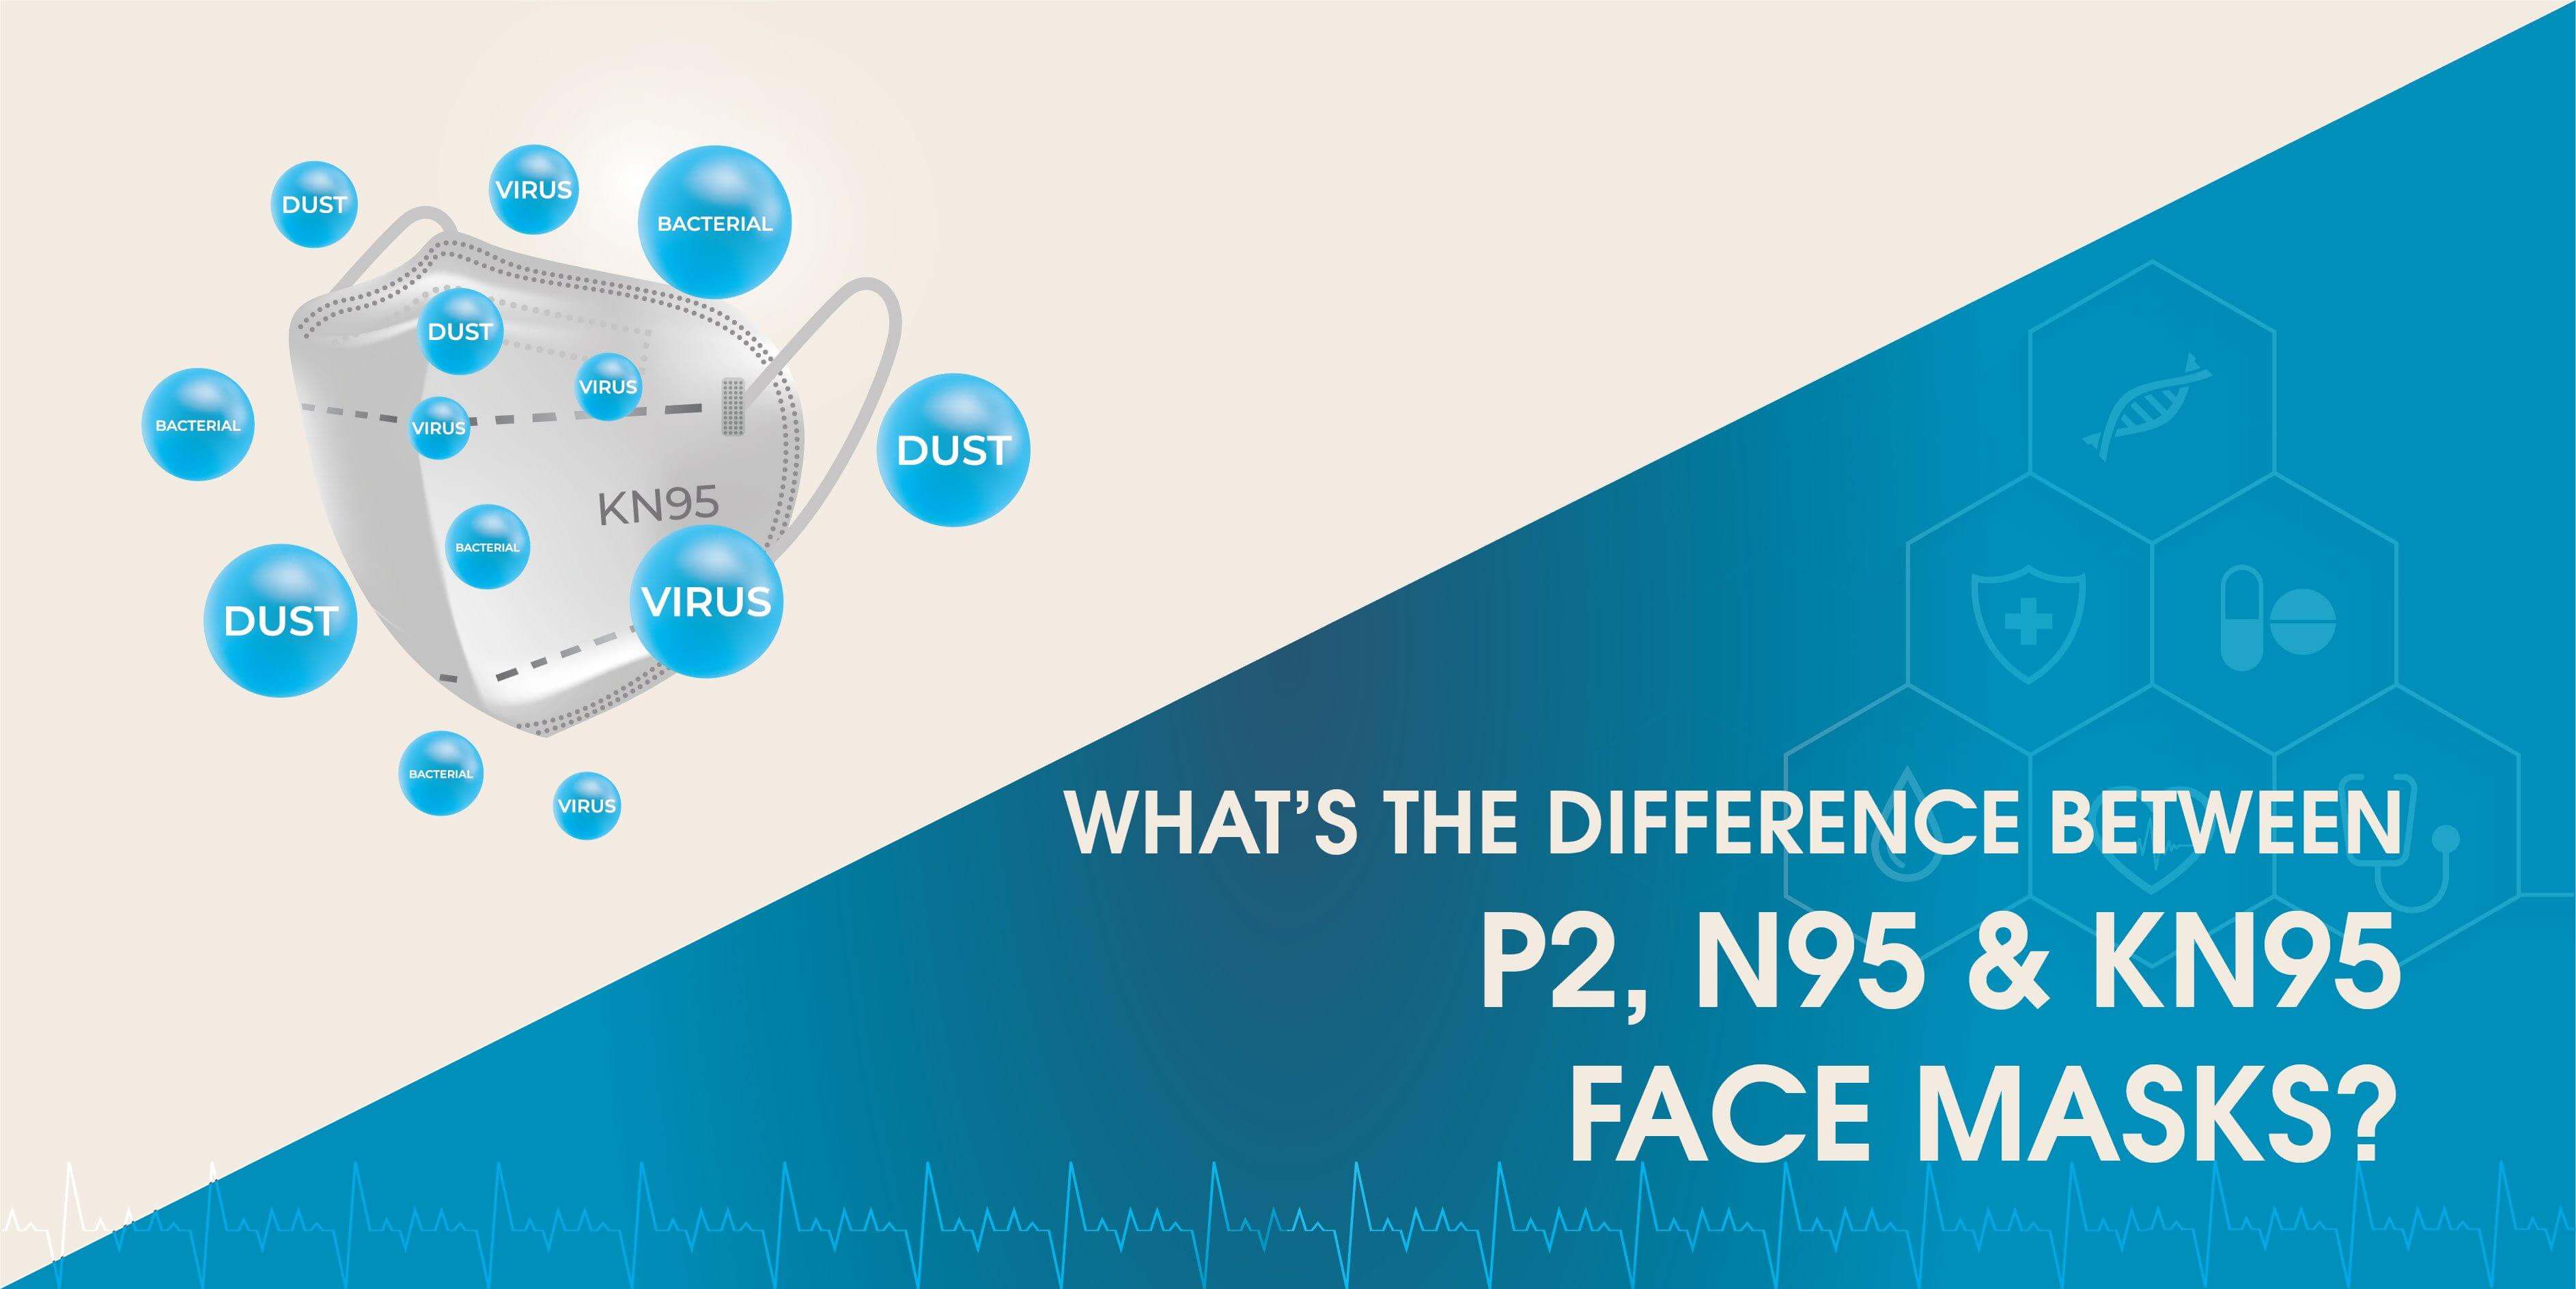 What’s the difference between P2, N95 and KN95 face masks?